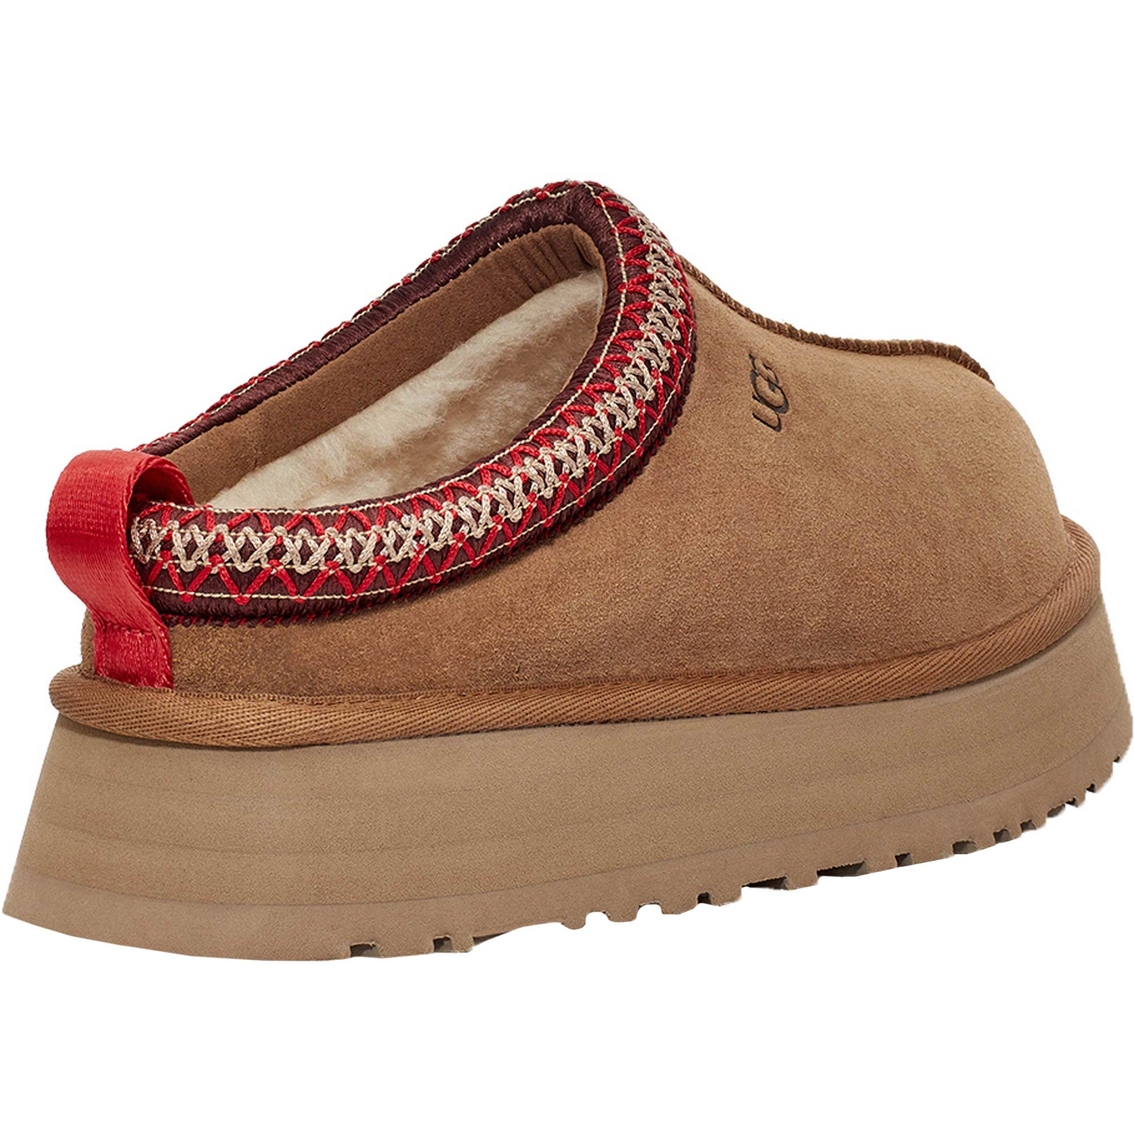 UGG Tazz Slippers - Image 4 of 6